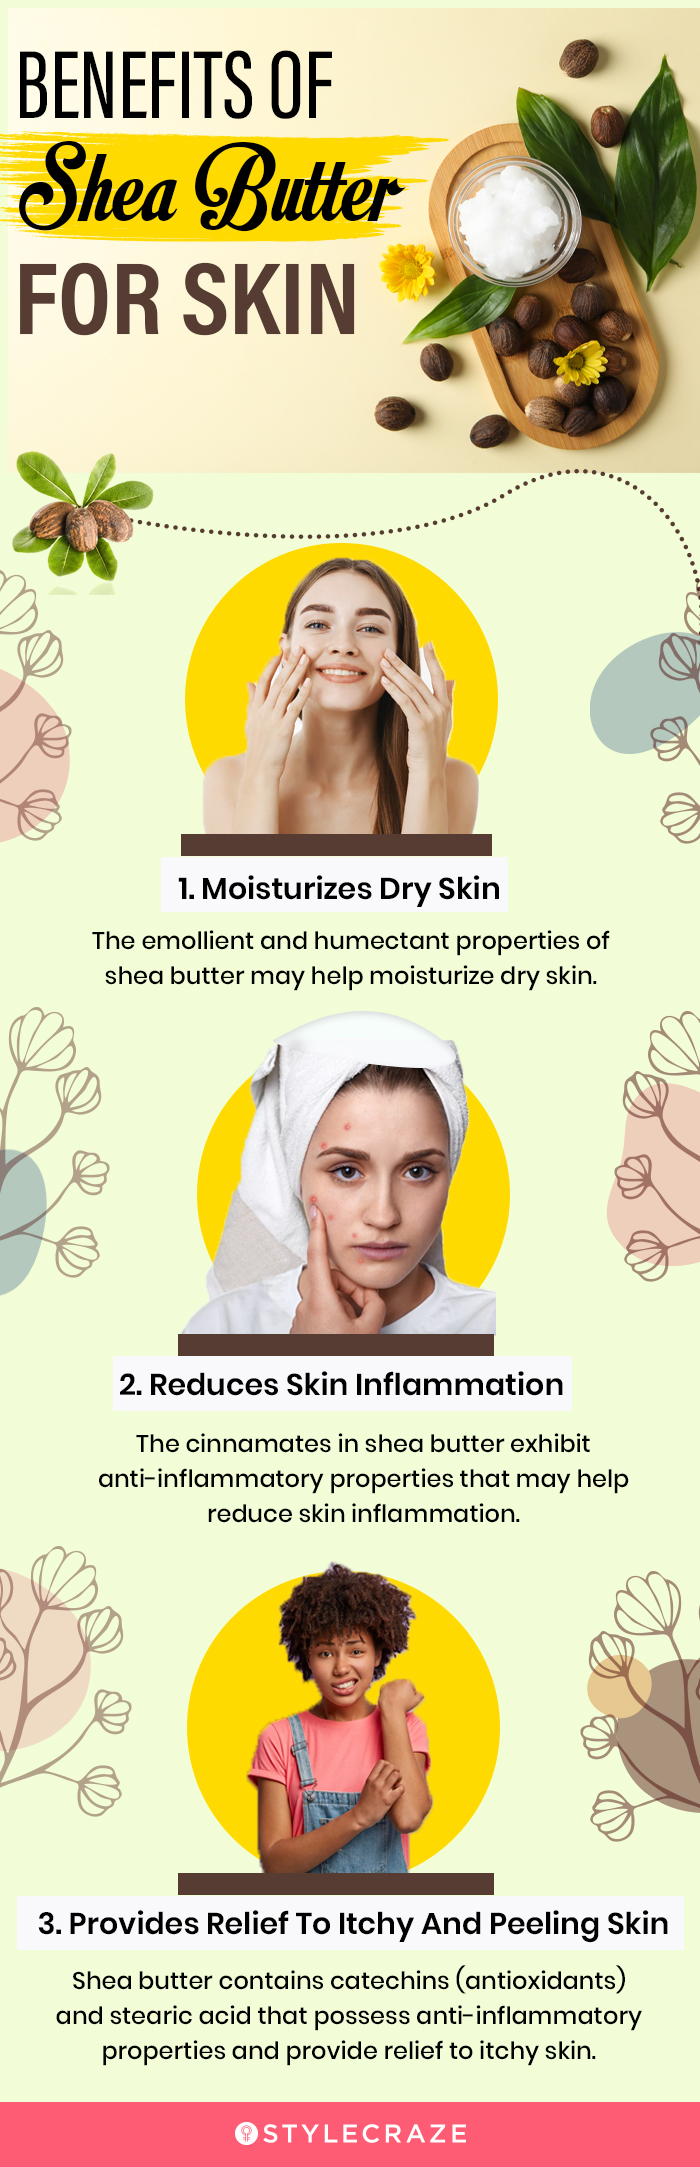 benefits of shea butter for skin (infographic)